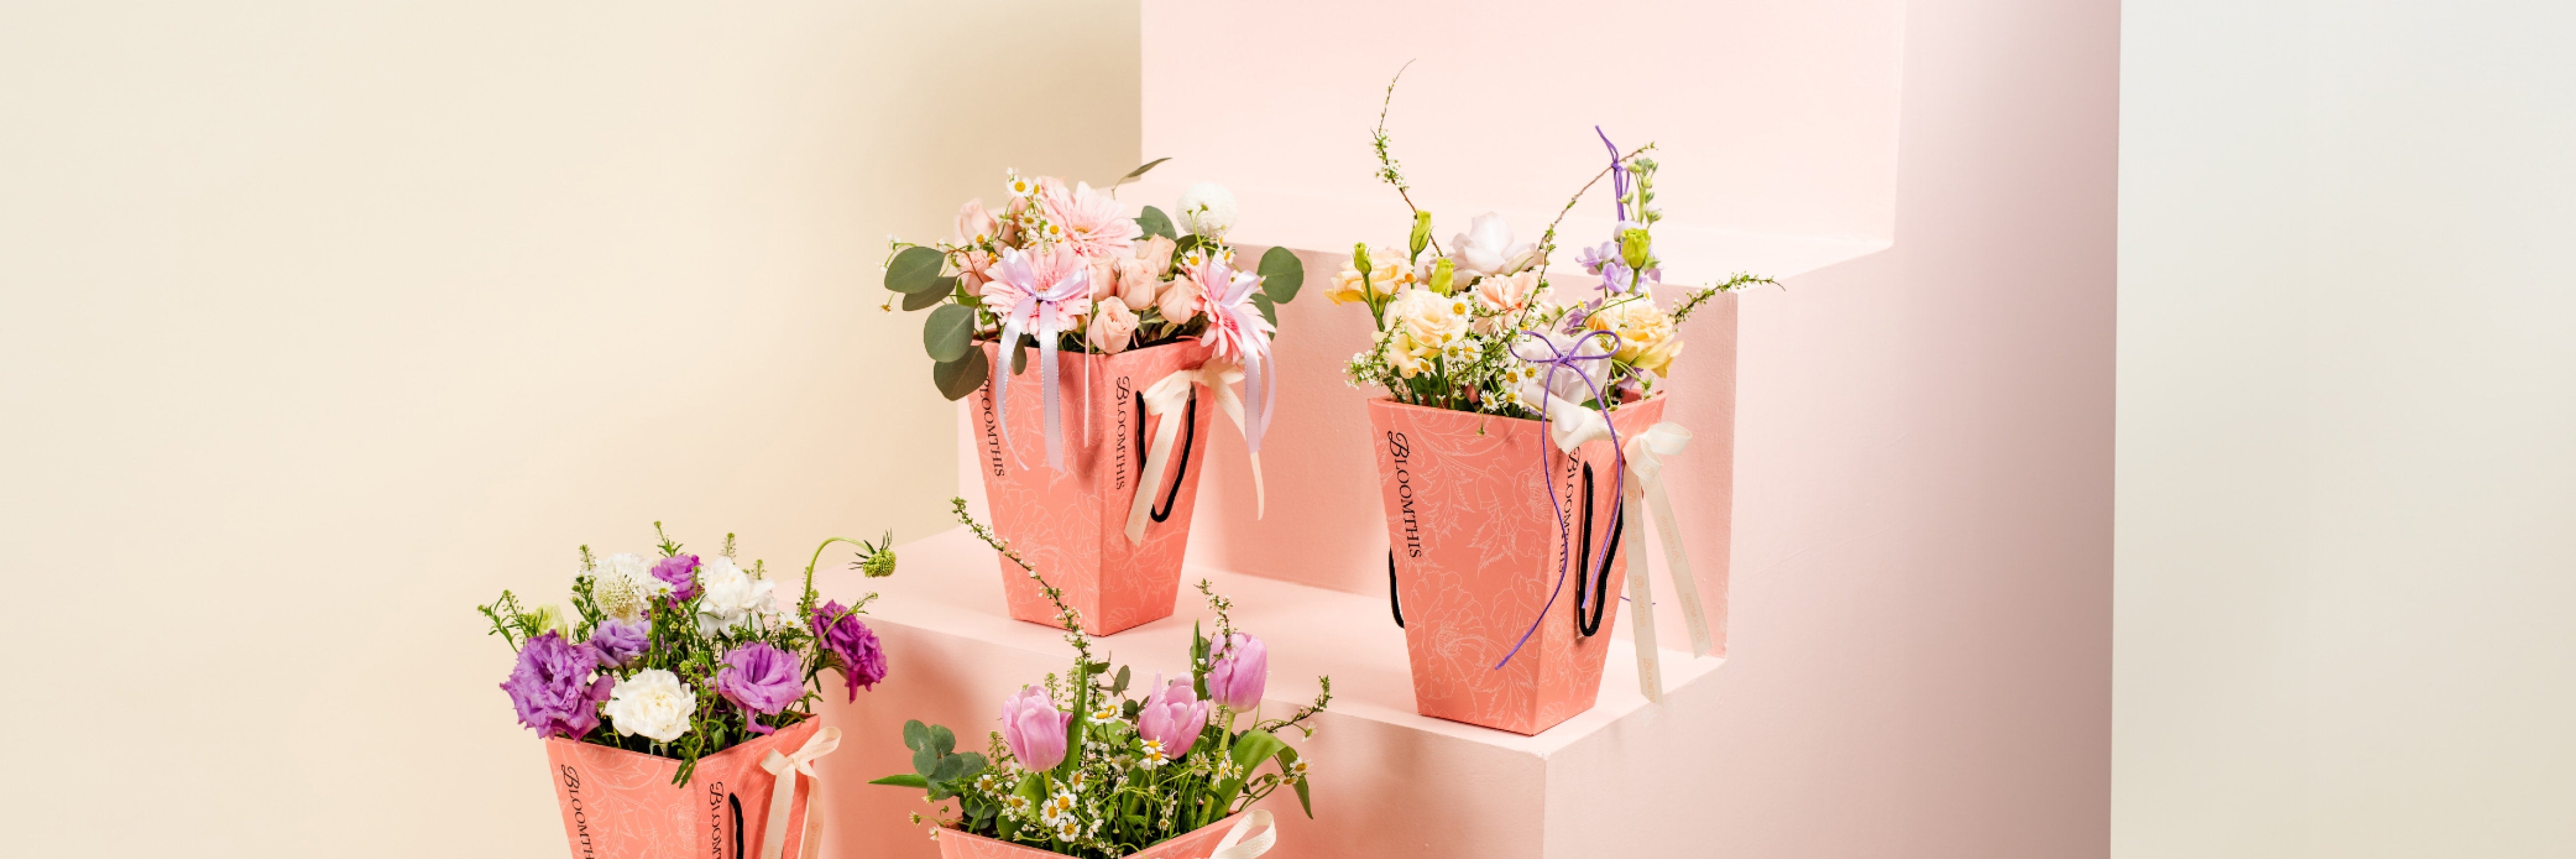 Women's Day flowers & gifts